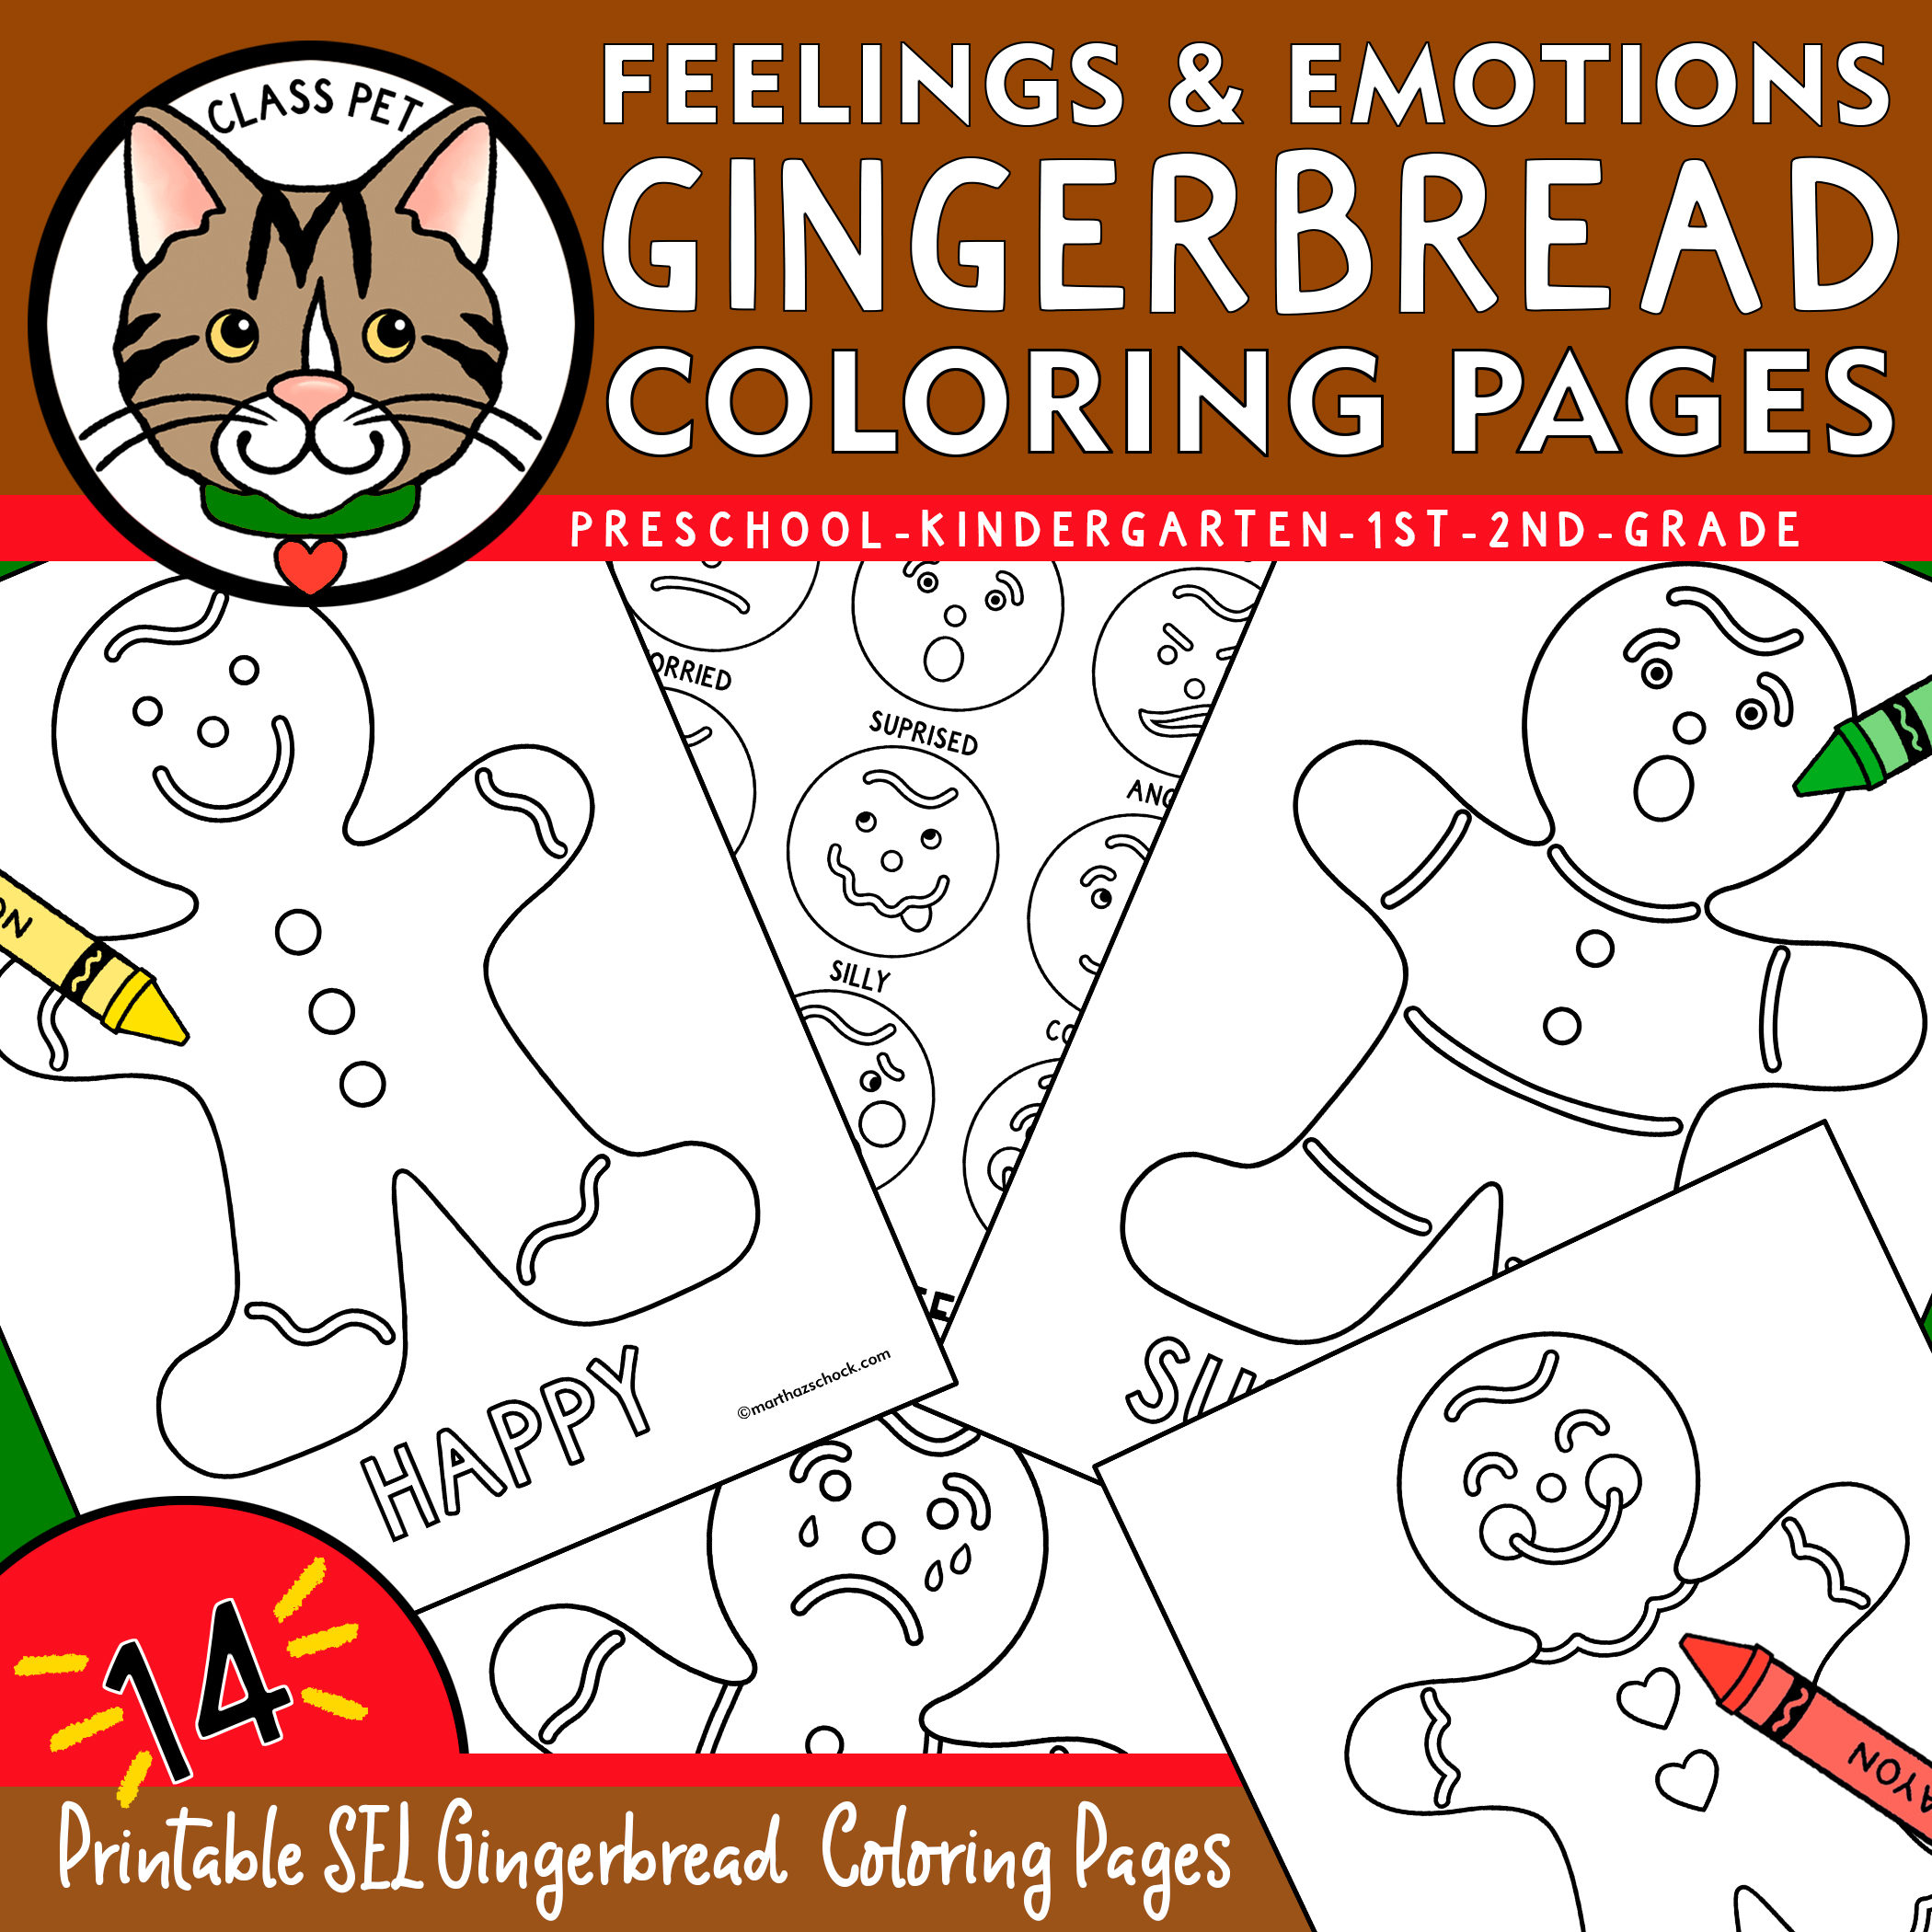 Sel feelings and emotions gingerbread coloring pages made by teachers